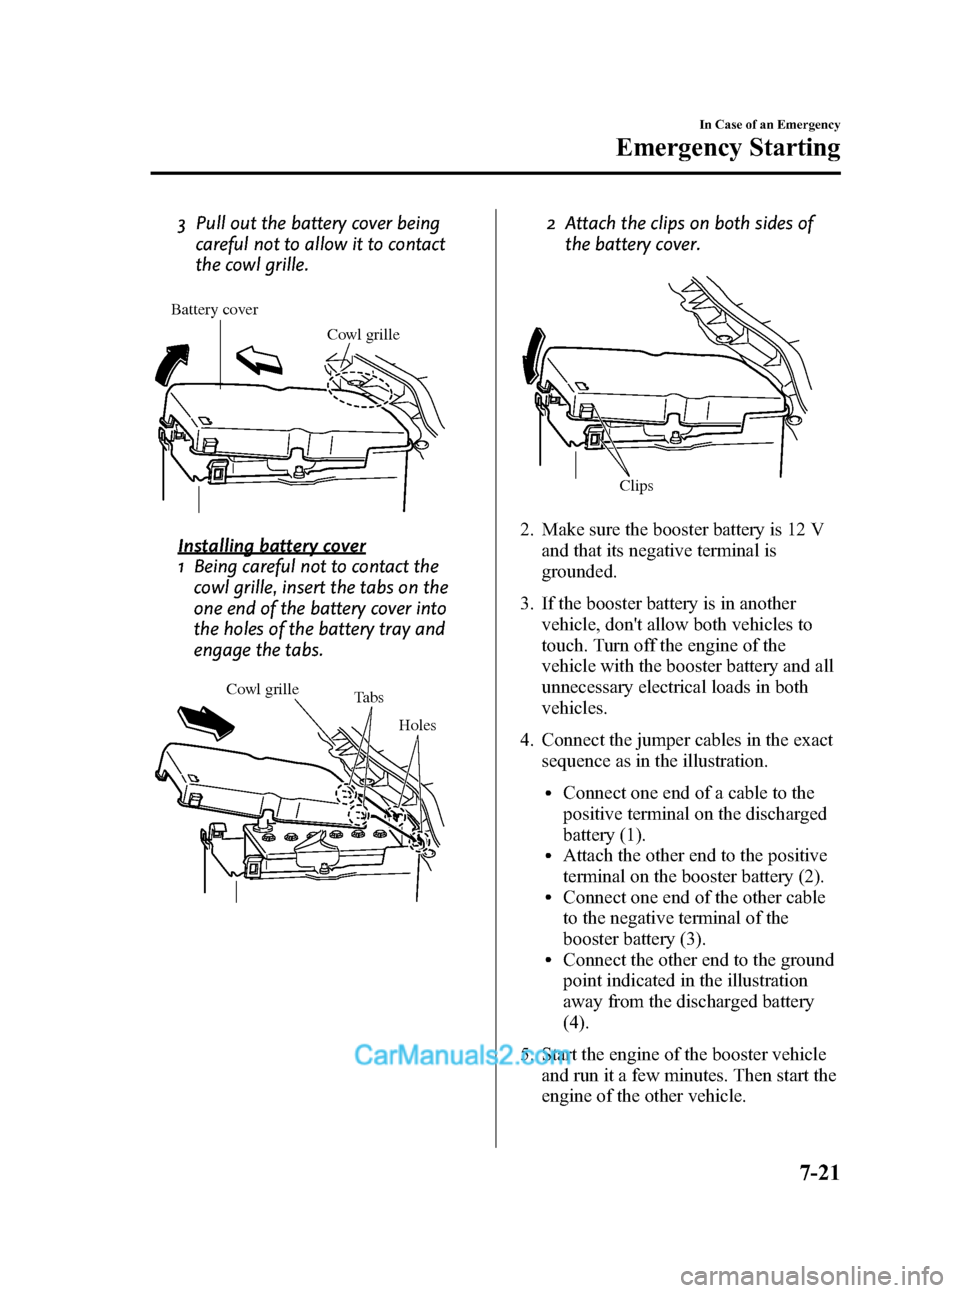 MAZDA MODEL MAZDASPEED 3 2012  Owners Manual (in English) Black plate (367,1)
3 Pull out the battery cover being
careful not to allow it to contact
the cowl grille.
Battery cover
Cowl grille
Installing battery cover
1 Being careful not to contact the
cowl gr